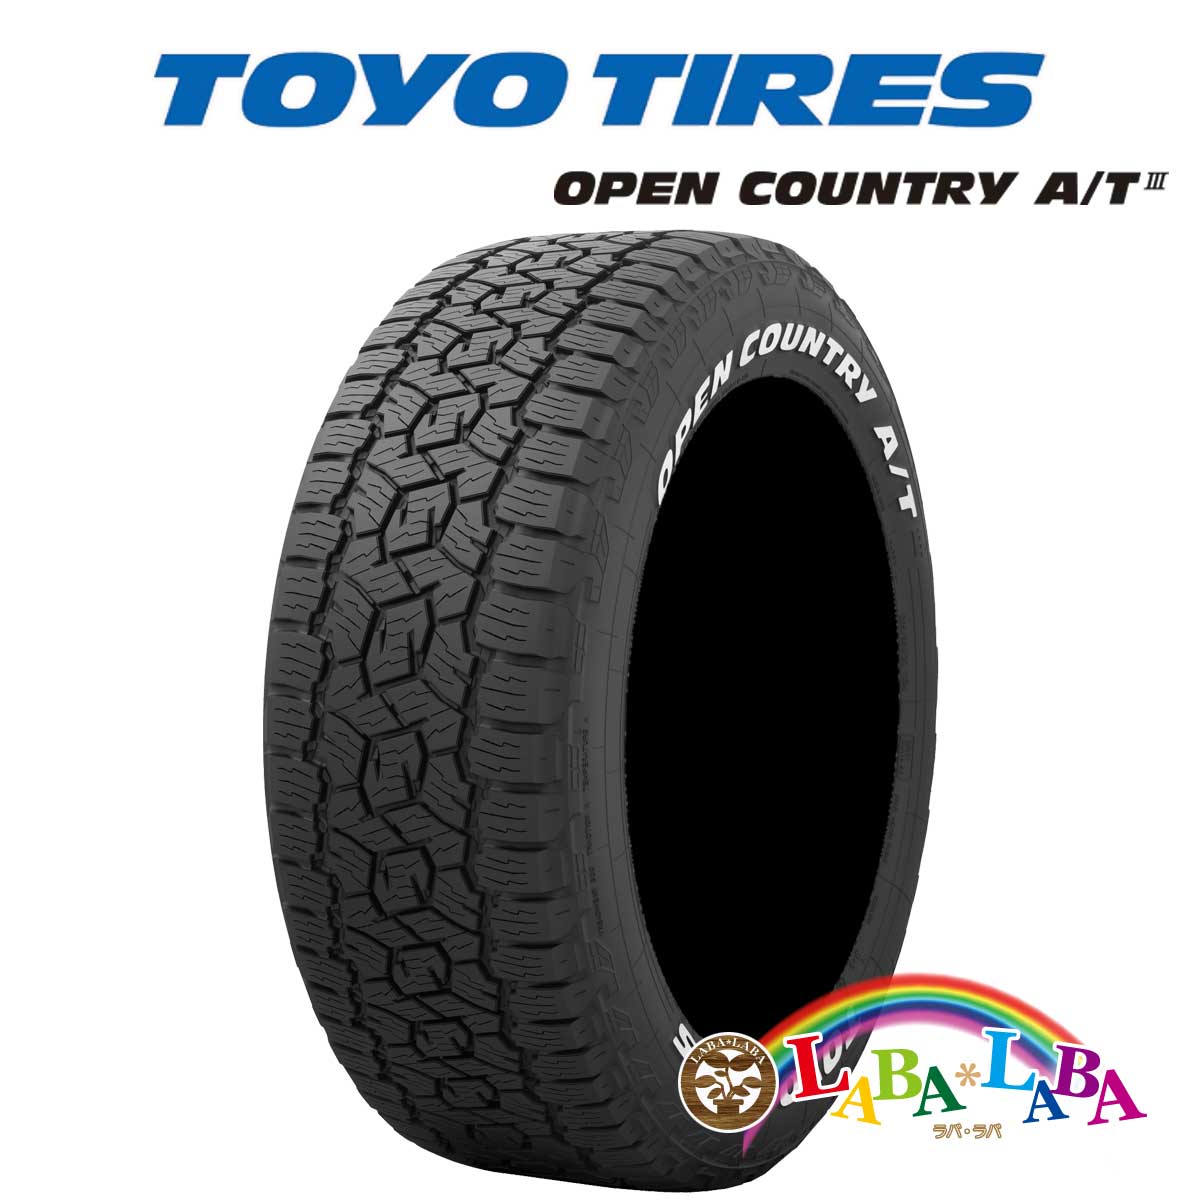 TOYO OPEN COUNTRY A/TIII (A/T3) WL 175/80R16 91S オールテレーン ホワイトレター 2本セット